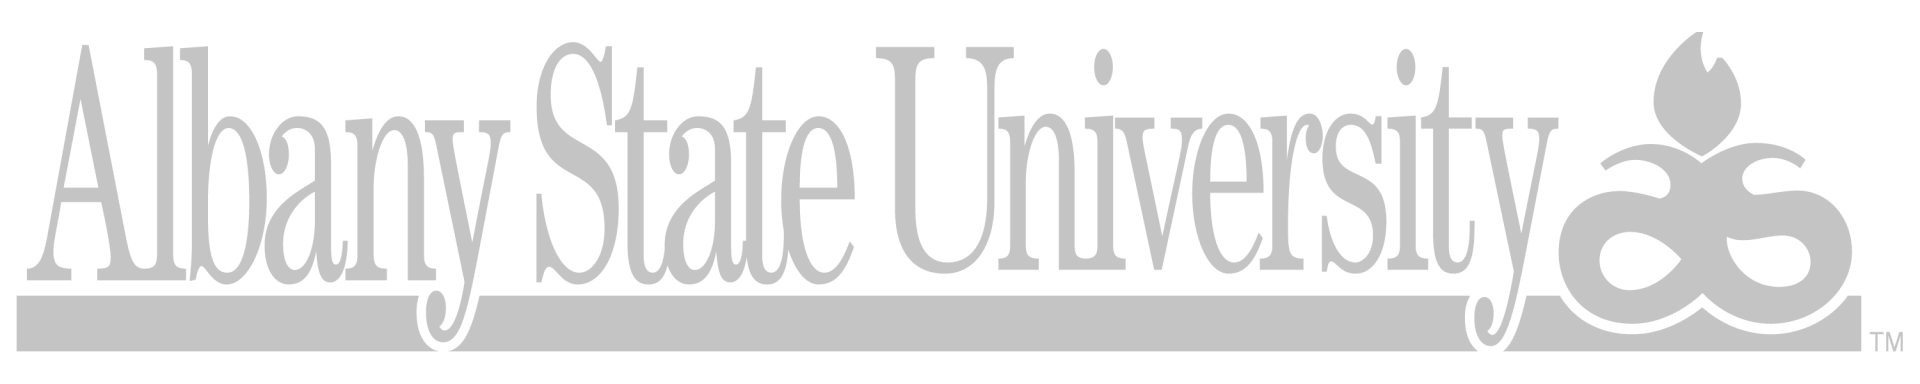 A logo for albany state university is shown on a white background